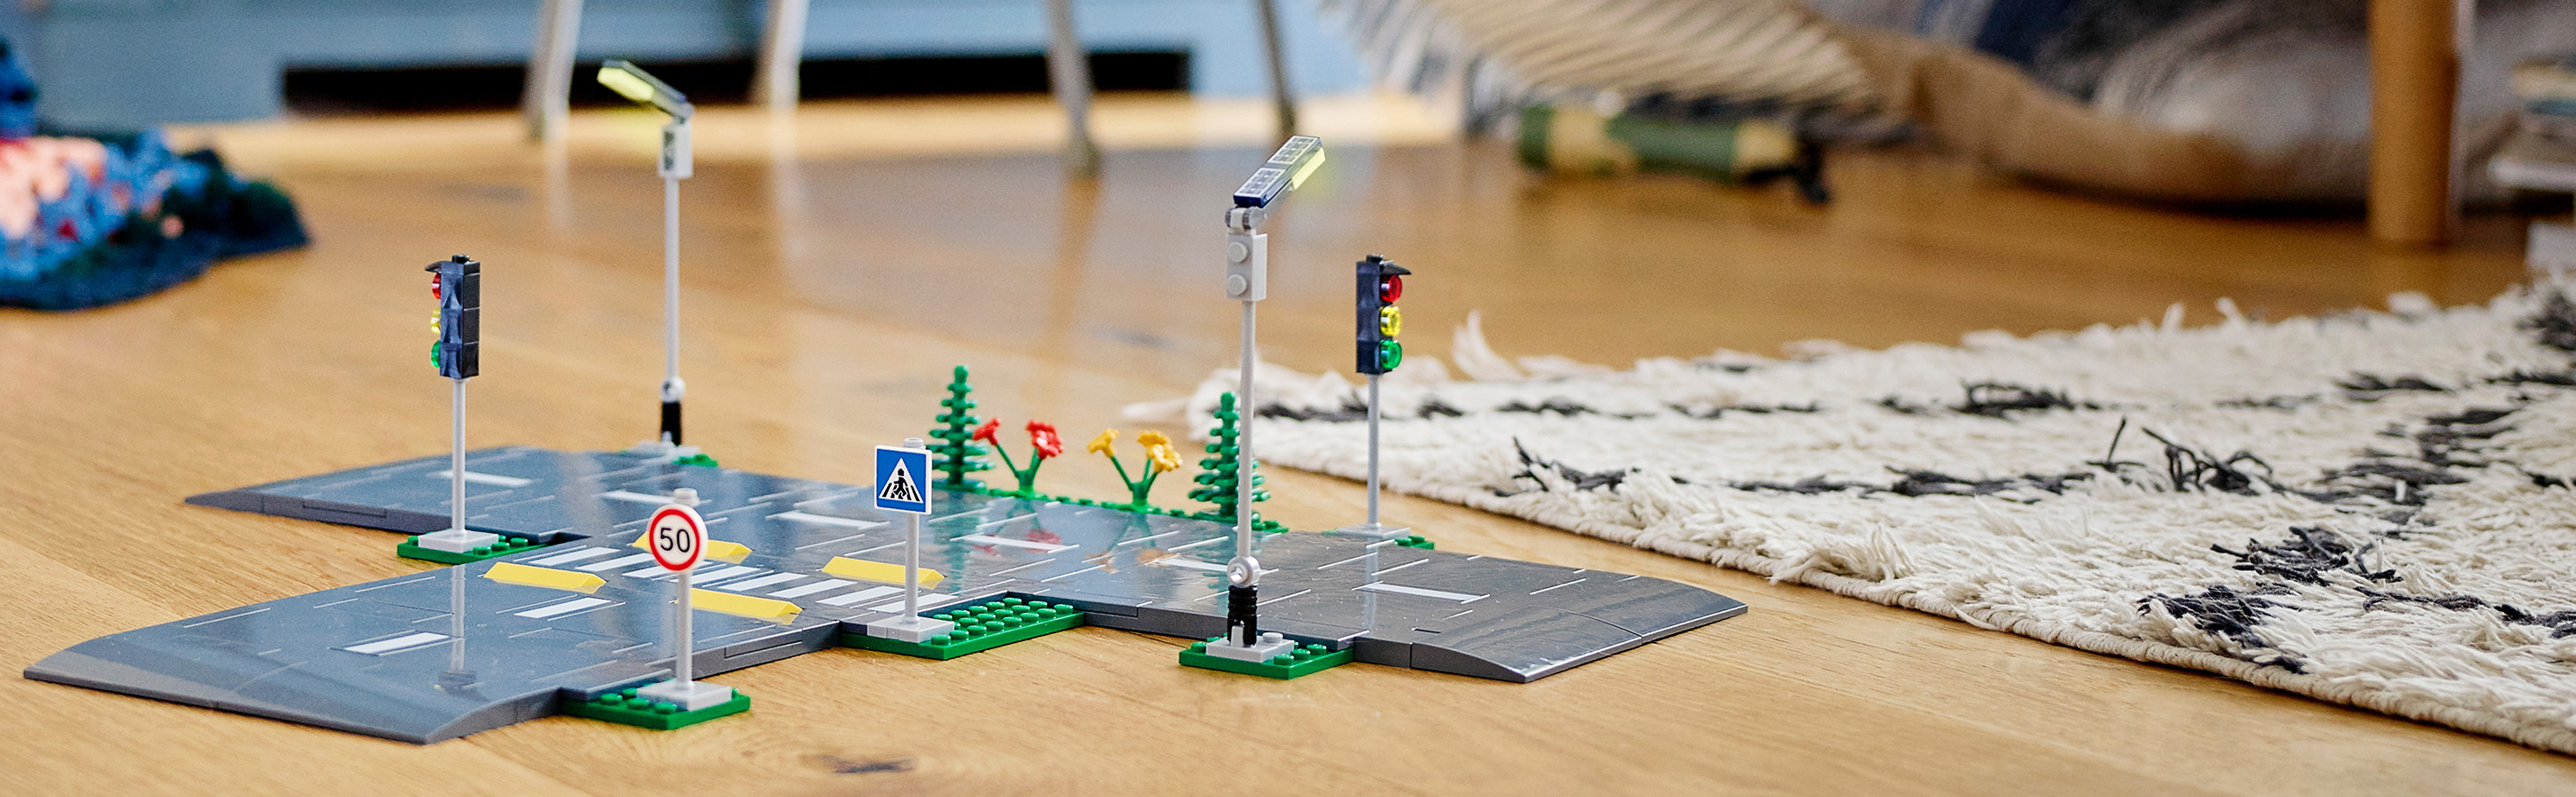 Connect your creations with LEGO® Road Plates